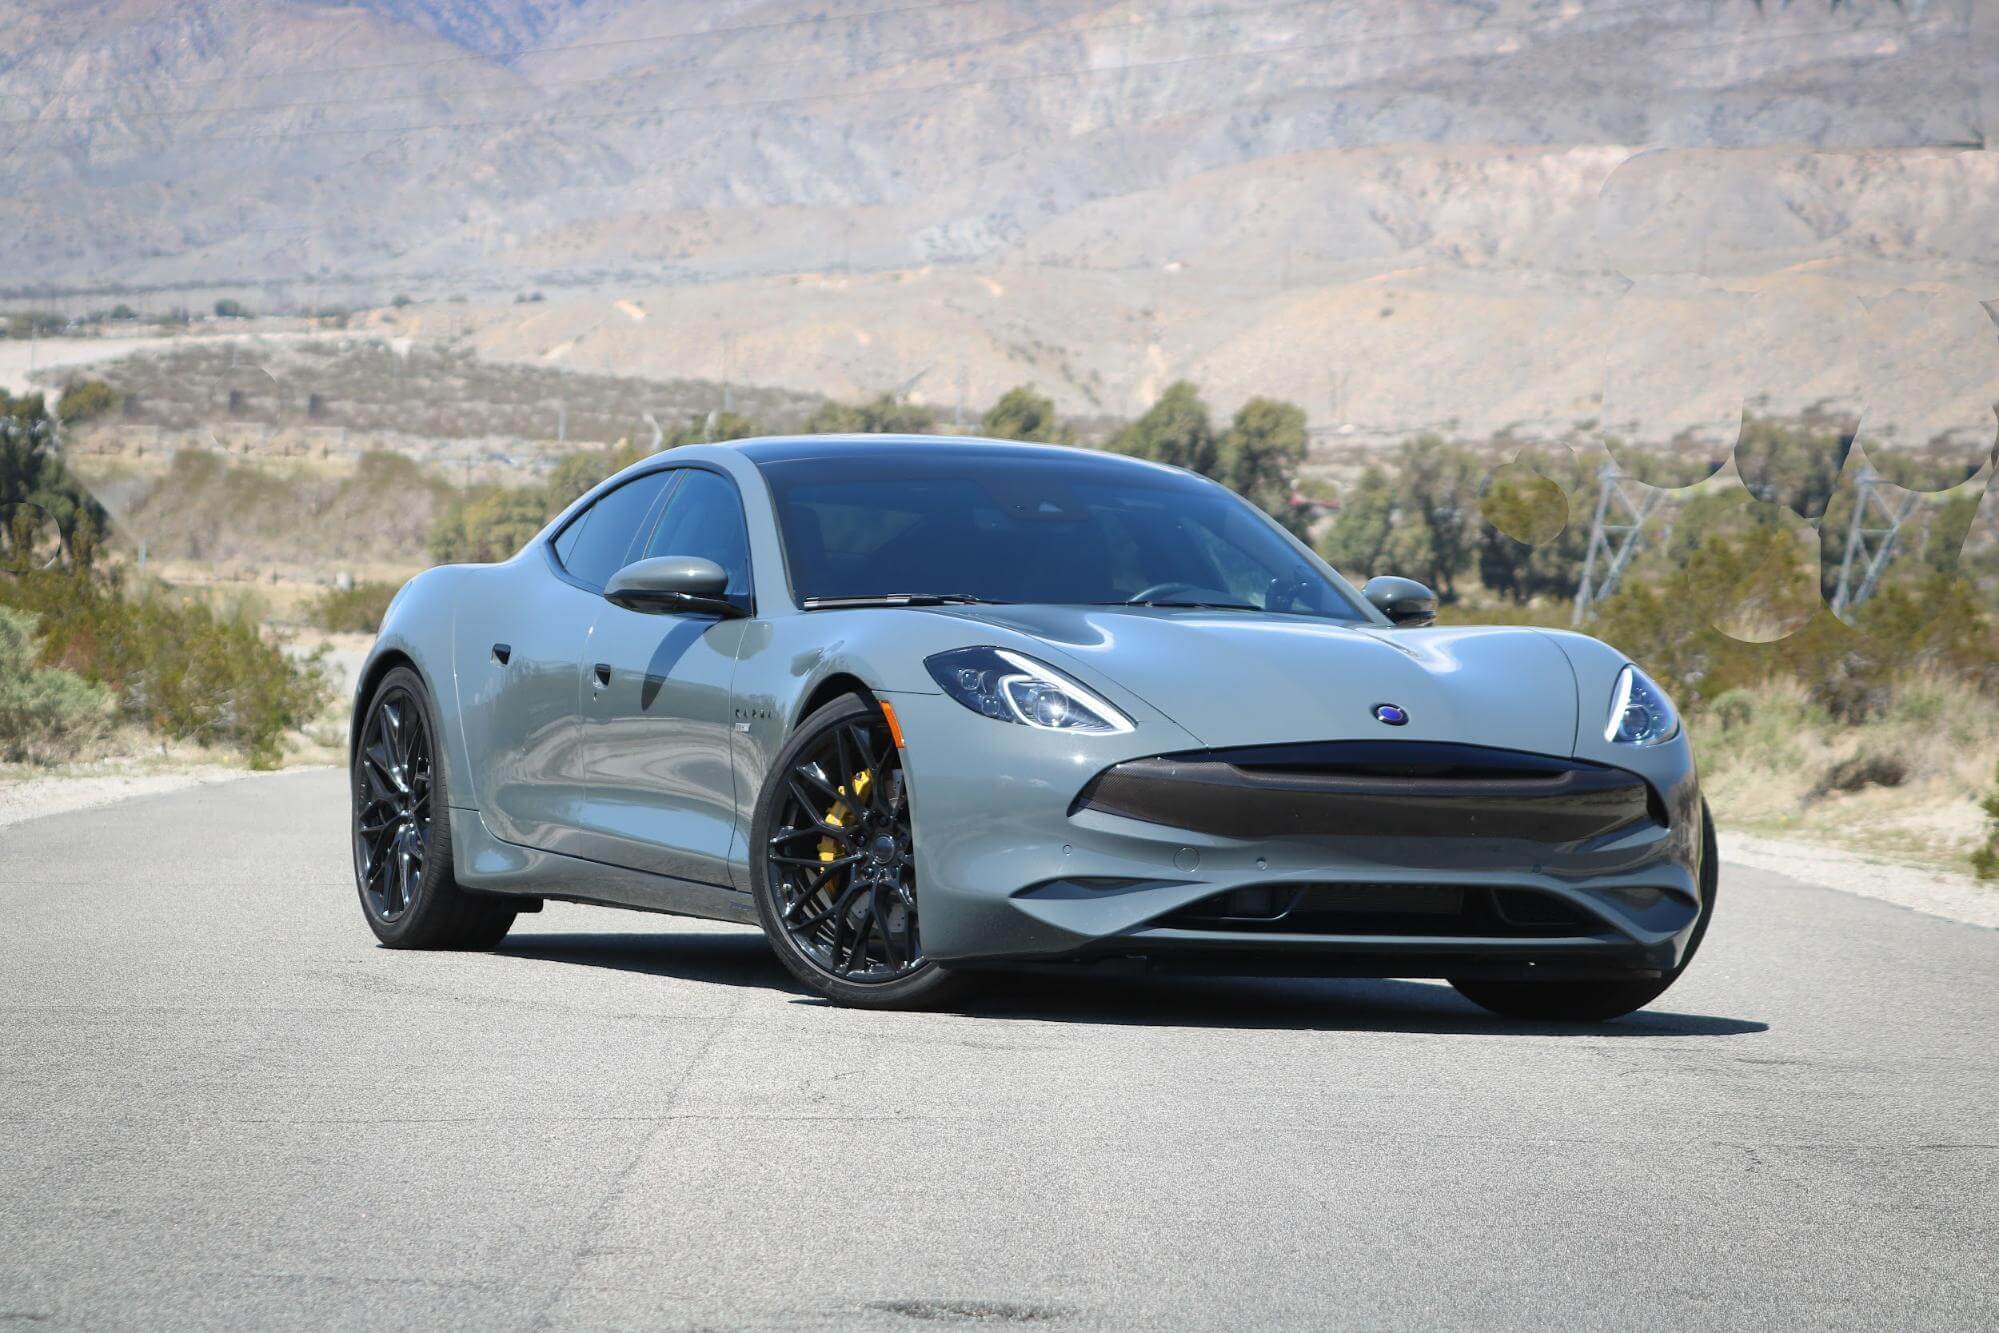 https://e-vehicleinfo.com/karma-gs-6-and-gs-e-6-best-luxury-electric-cars-in-usa/